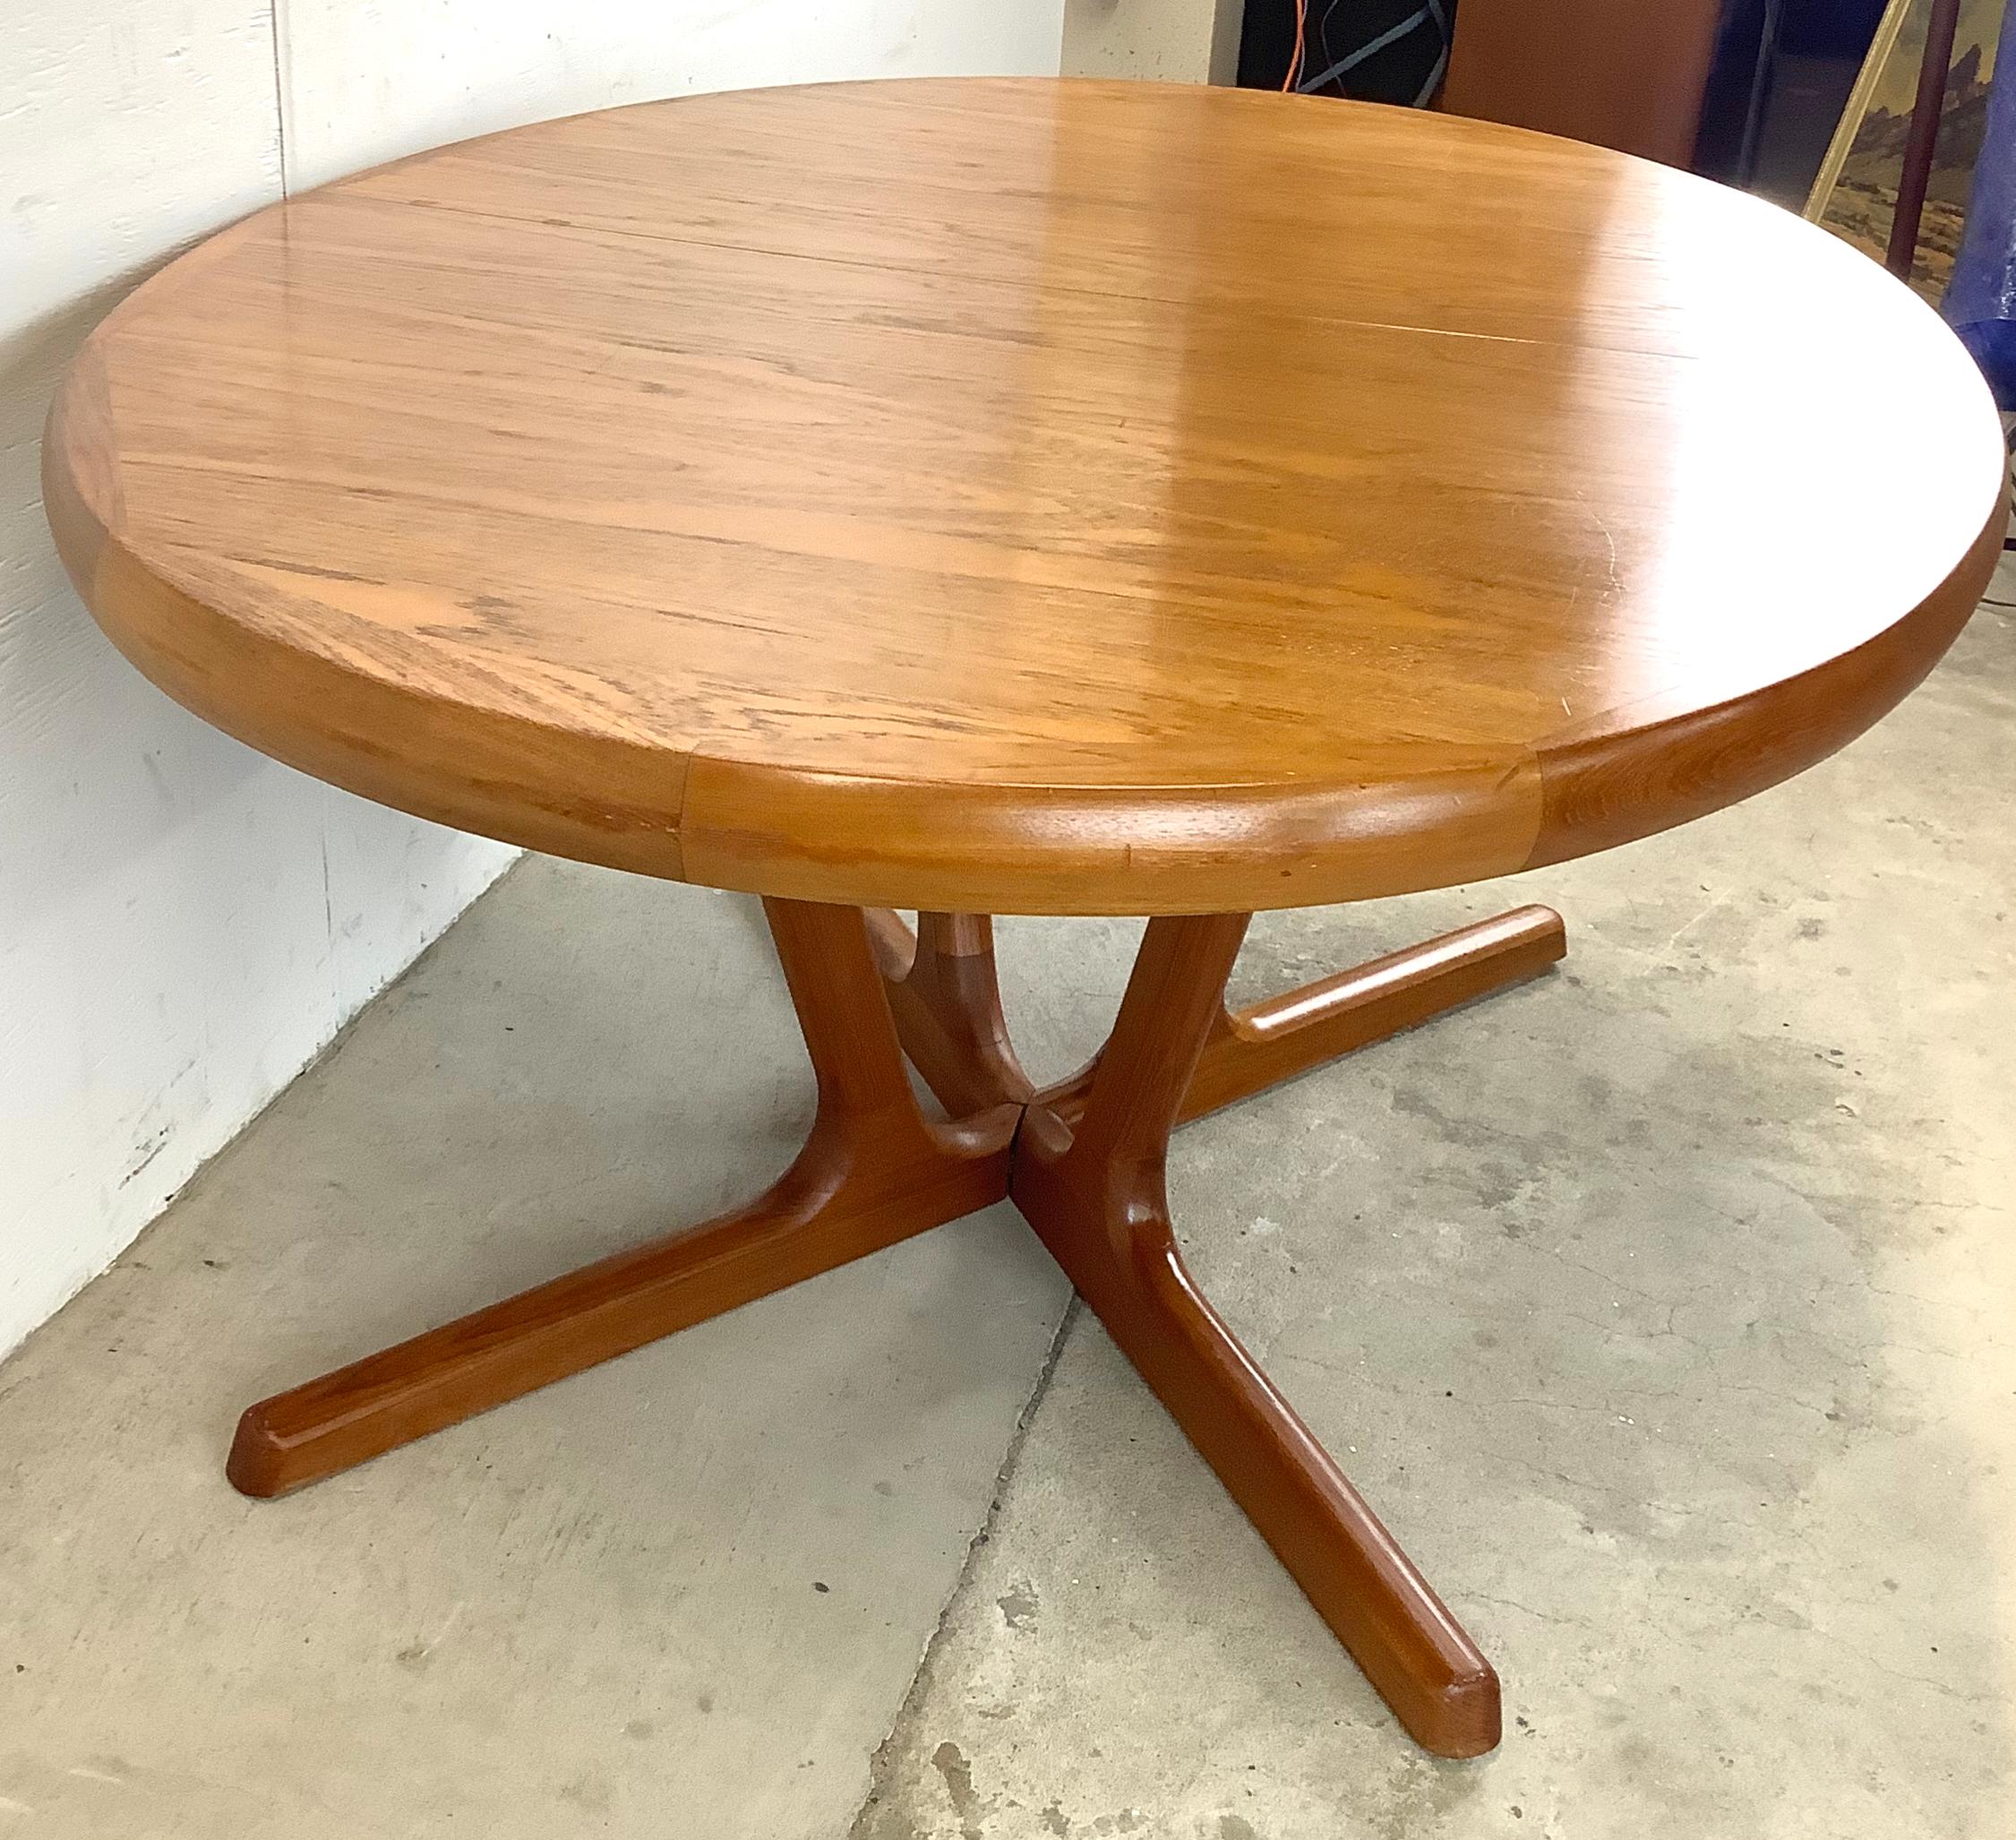 Scandinavian Modern Teak Oval Dining Table With Leaves In Fair Condition For Sale In Trenton, NJ